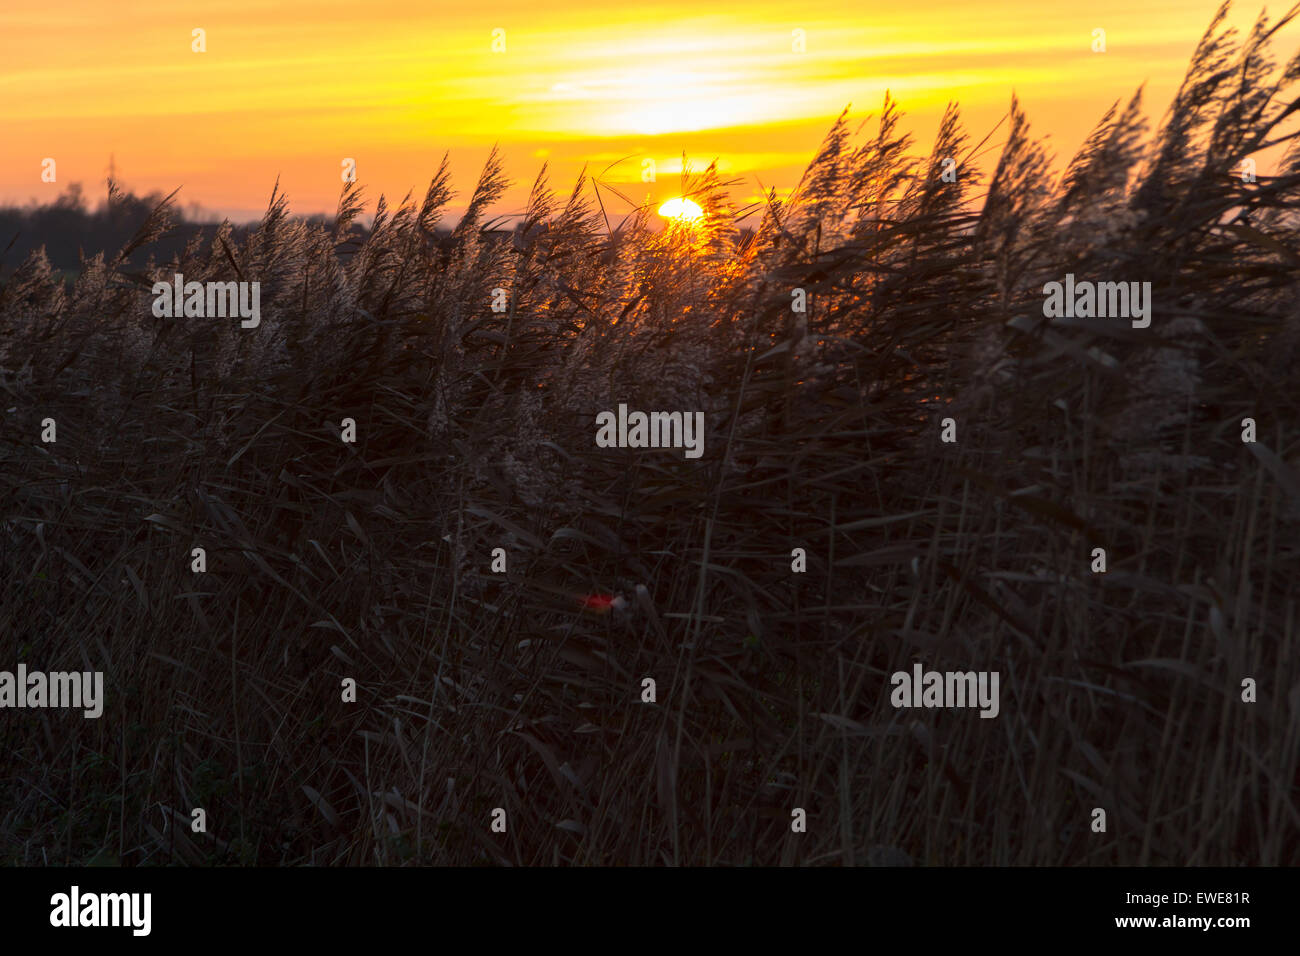 Hinte, Germany, sunset behind her in the wind moving reeds Stock Photo